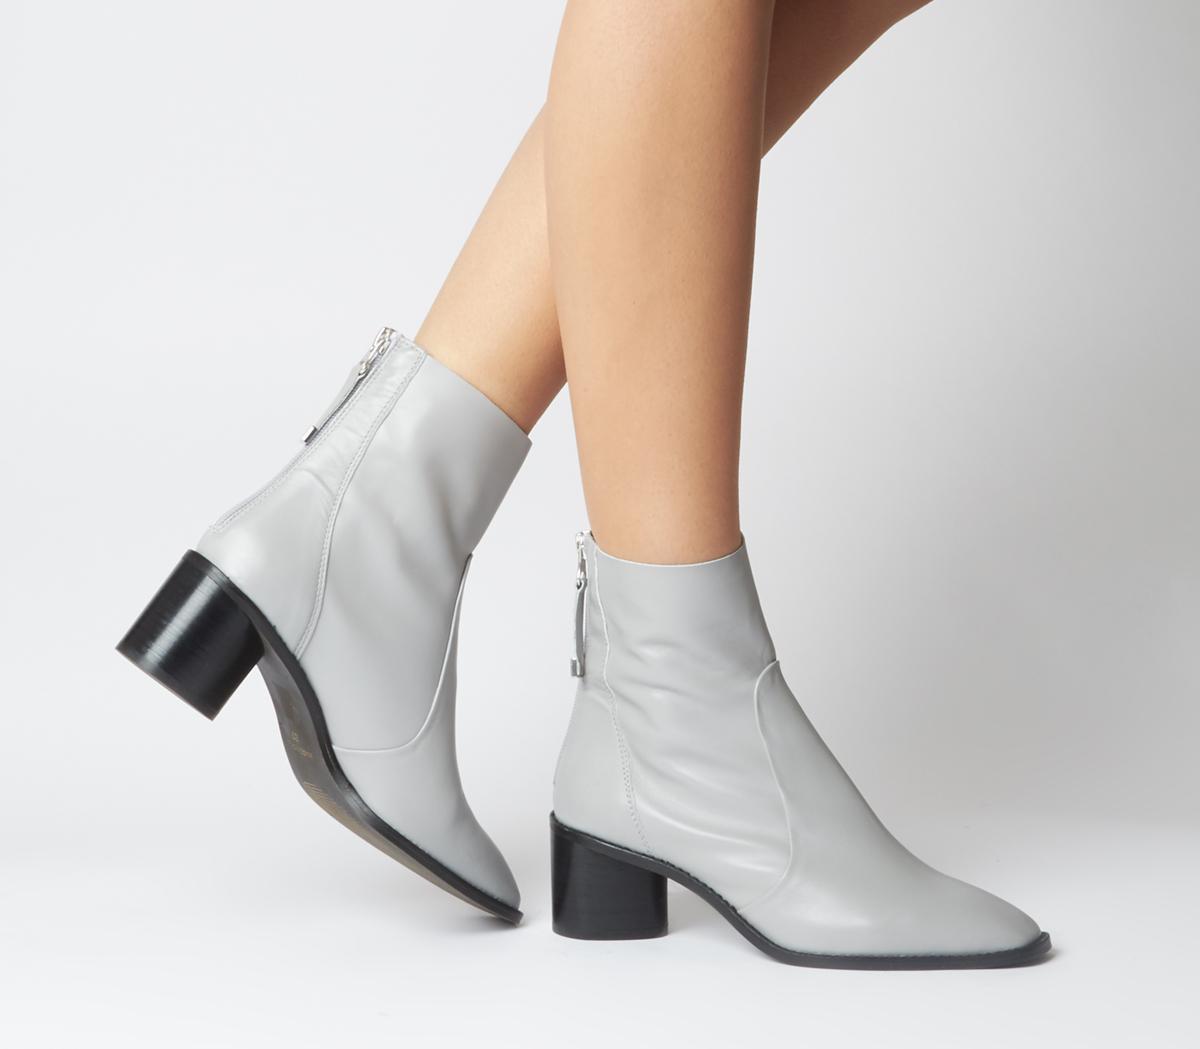 grey leather ankle boot